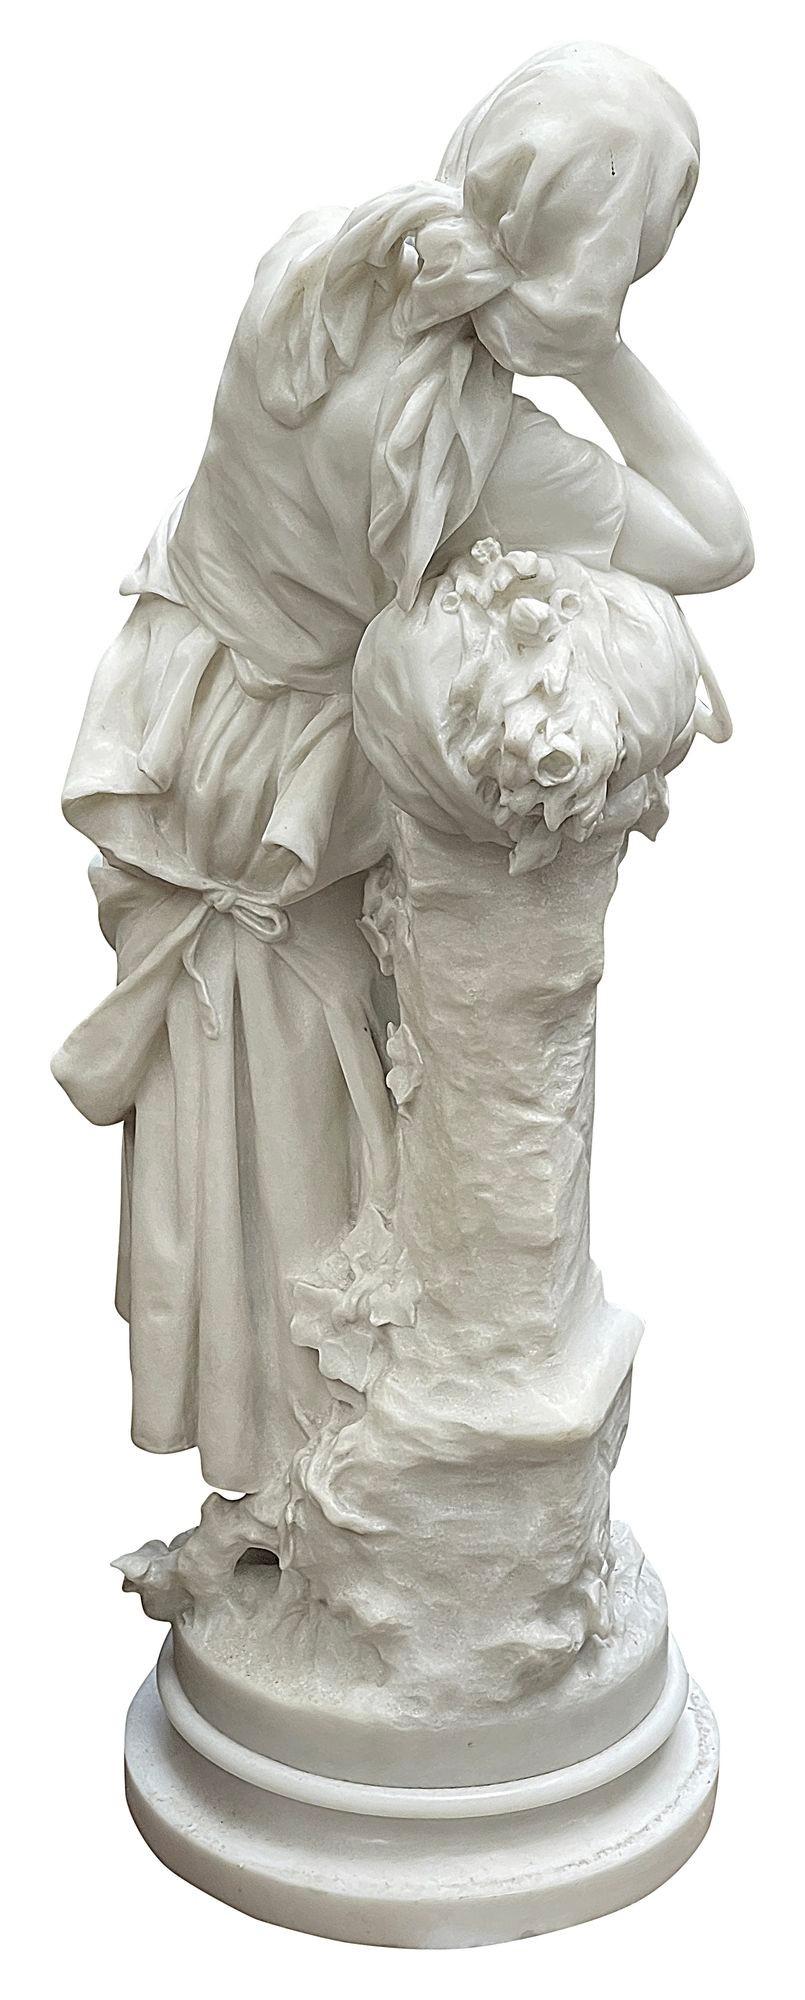 Hand-Carved 19th Century Marble statue of a flower seller, by Math. Moreau